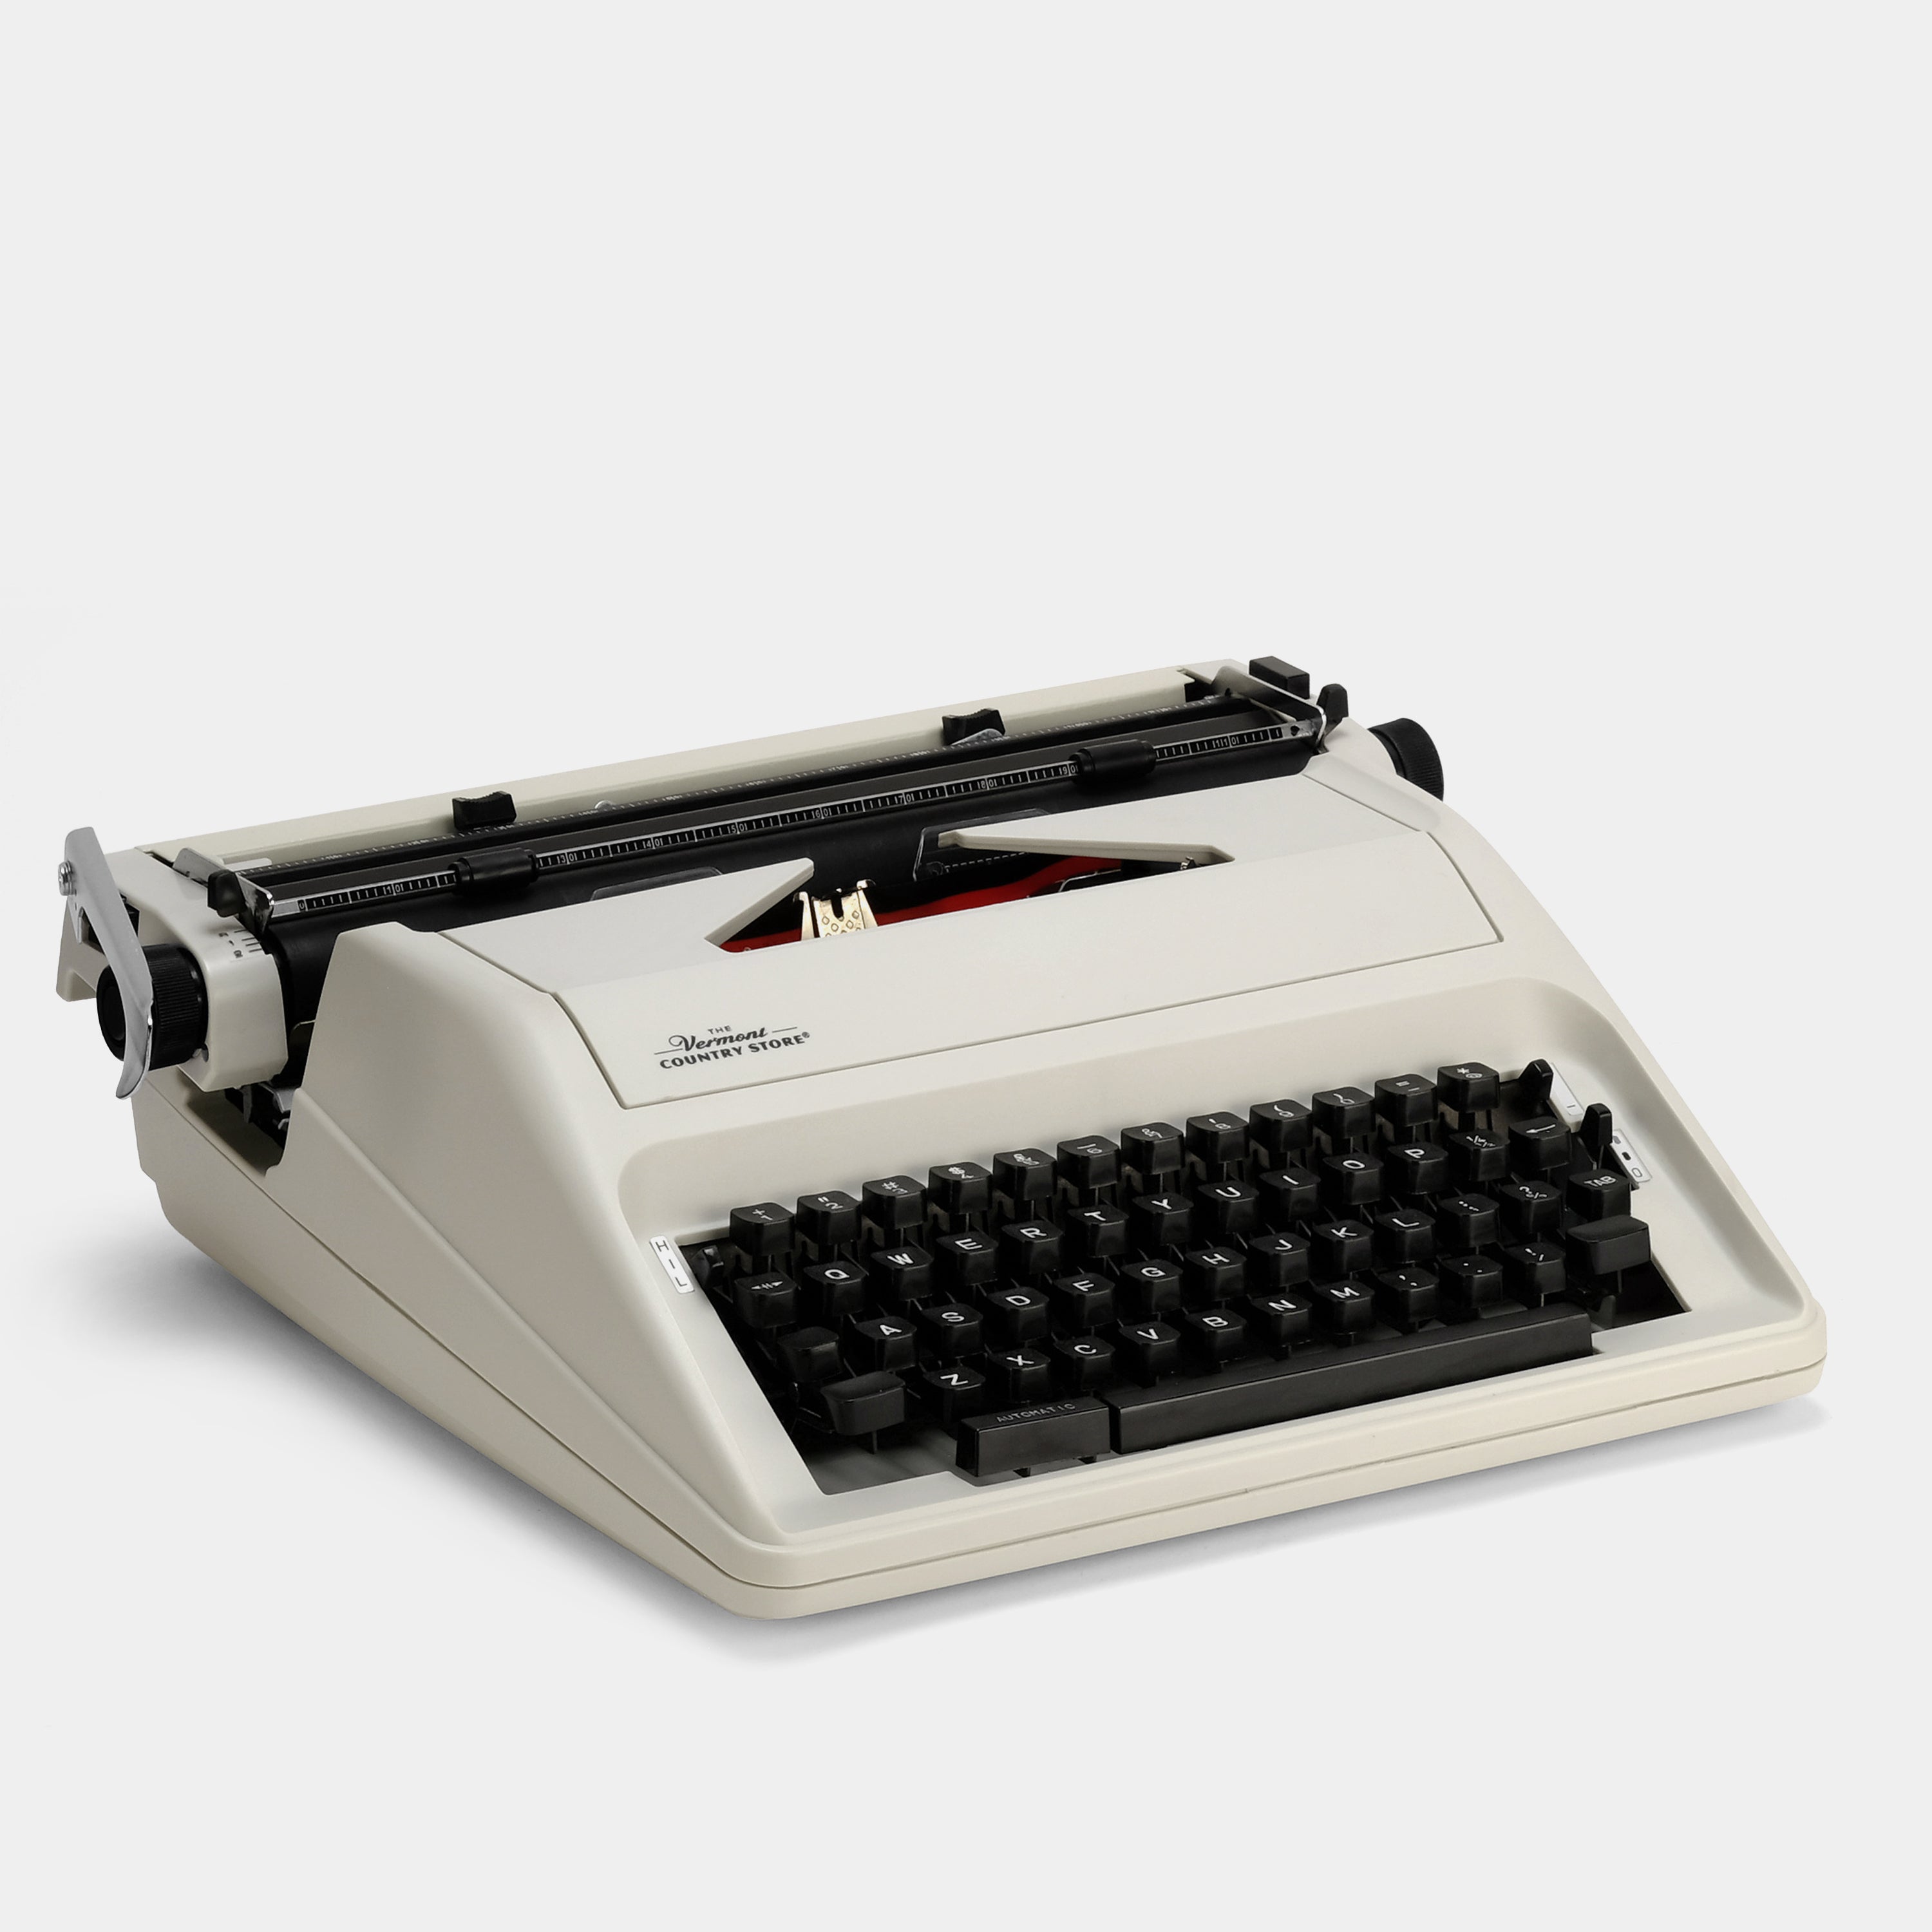 The Vermont Country Store Cream Manual Typewriter and Case